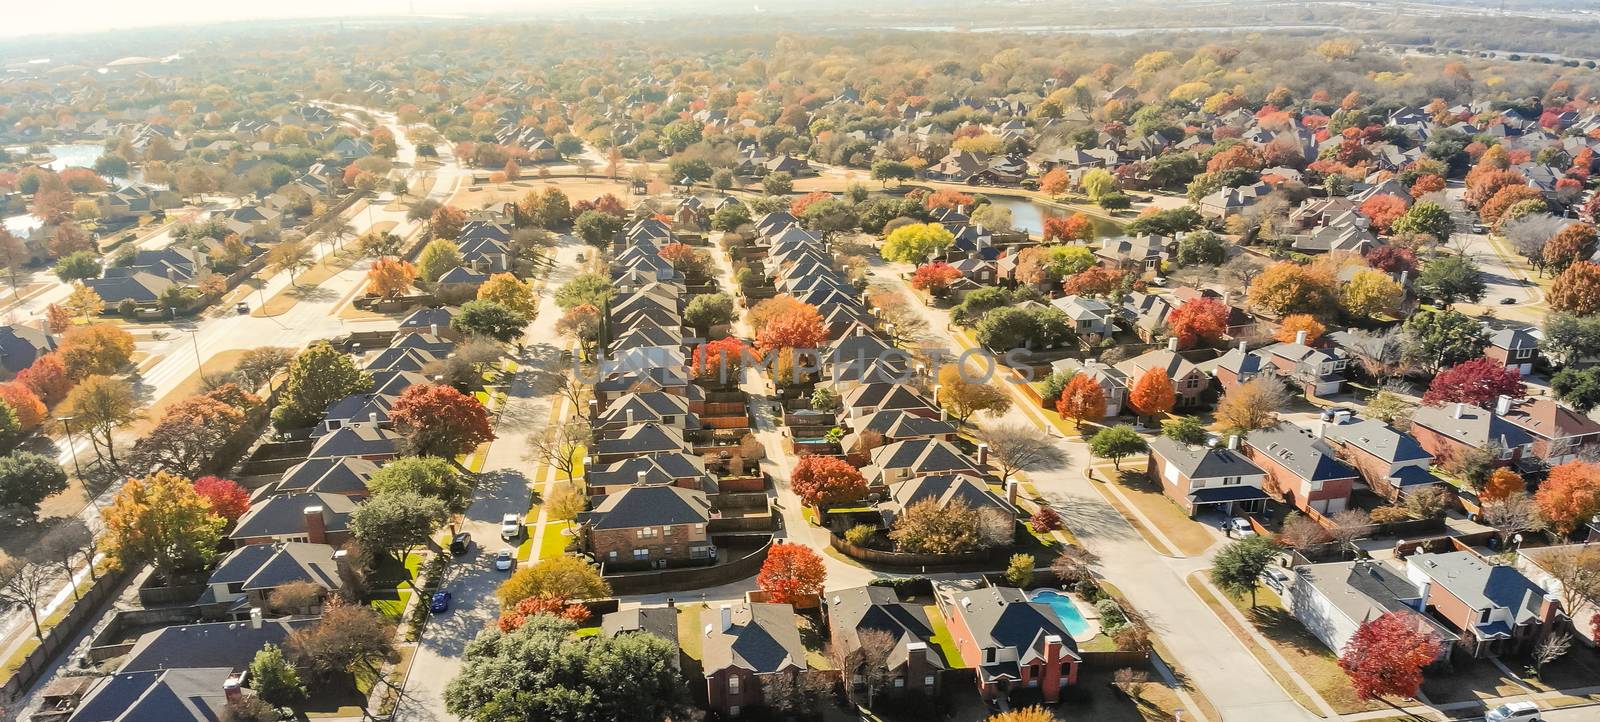 Panorama lakeside residential neighborhood in Dallas with new two story single family houses colorful fall foliage. Bright orange color along local street and drive way, beautiful Texas autumn scene